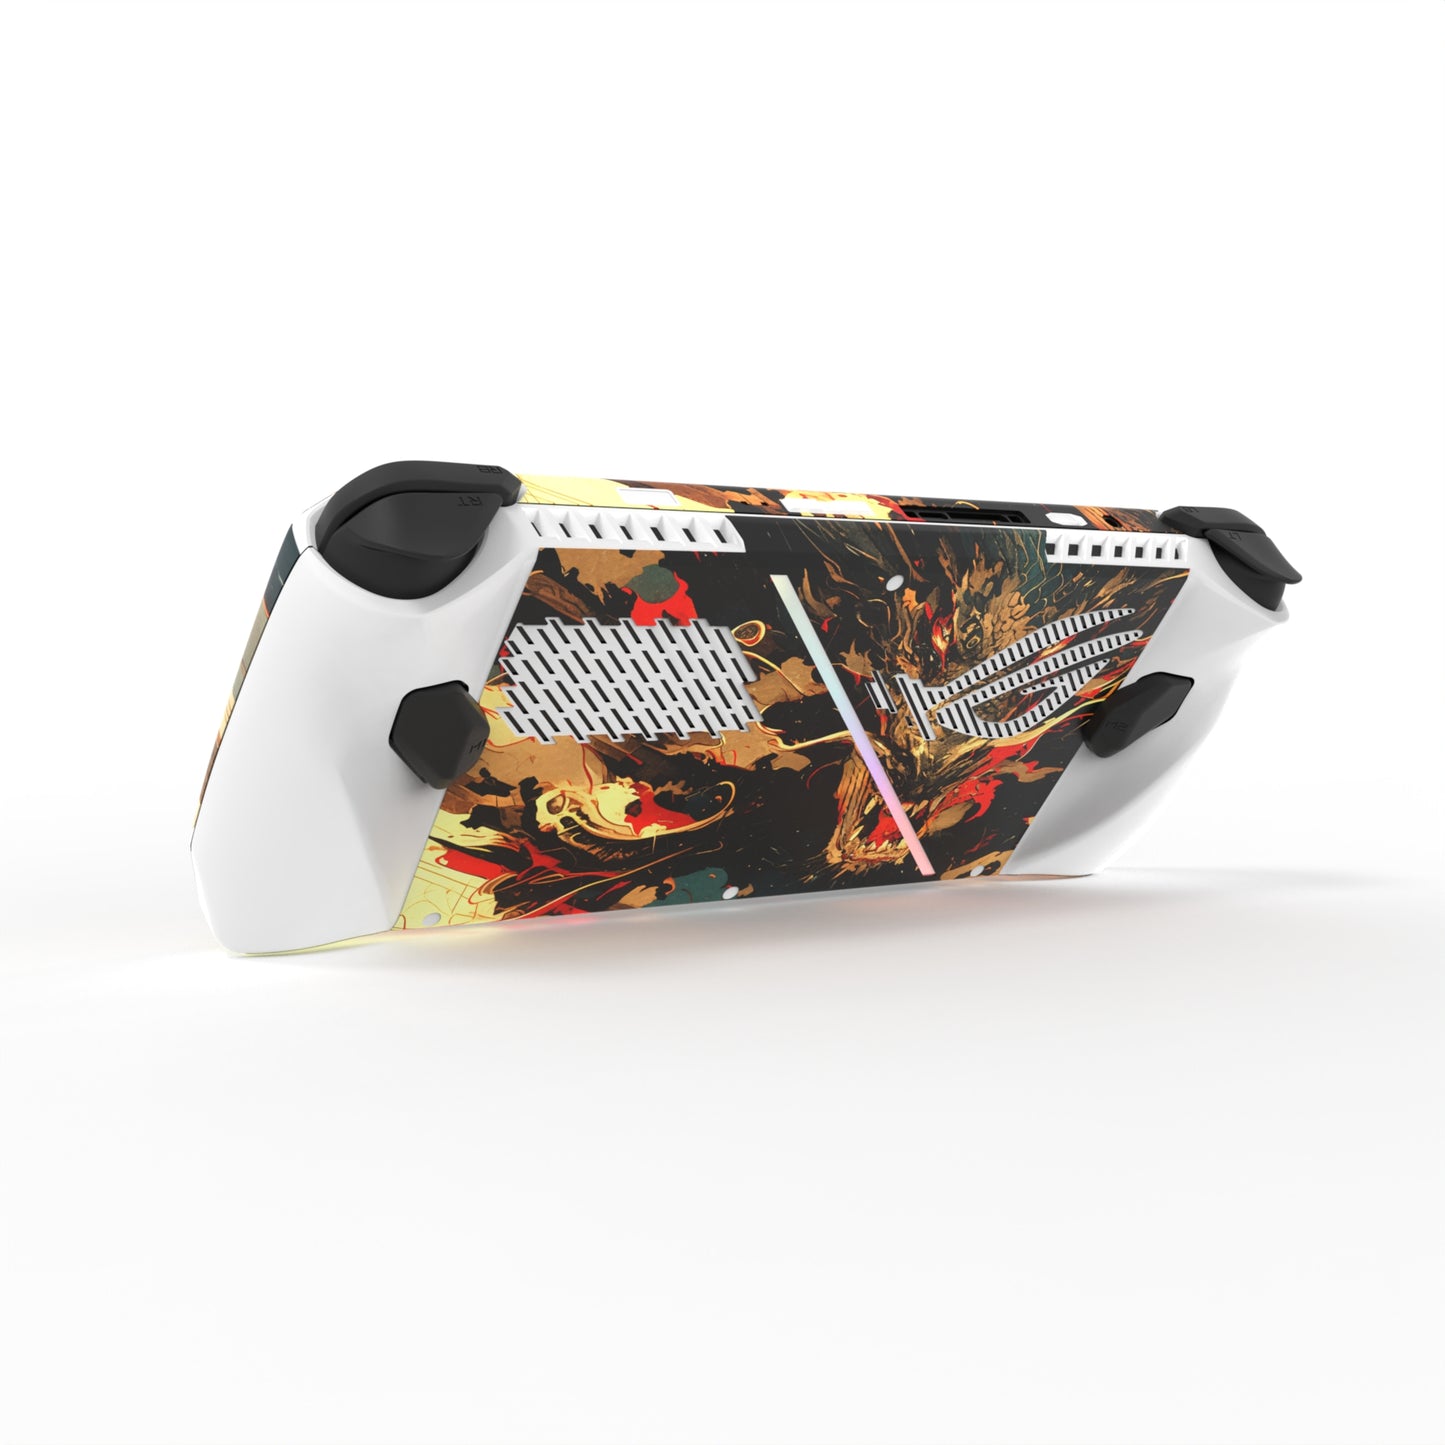 PlayVital Custom Stickers Vinyl Wraps Protective Skin Decal for ROG Ally Console - Dragon's Fury - RGTM033 PlayVital